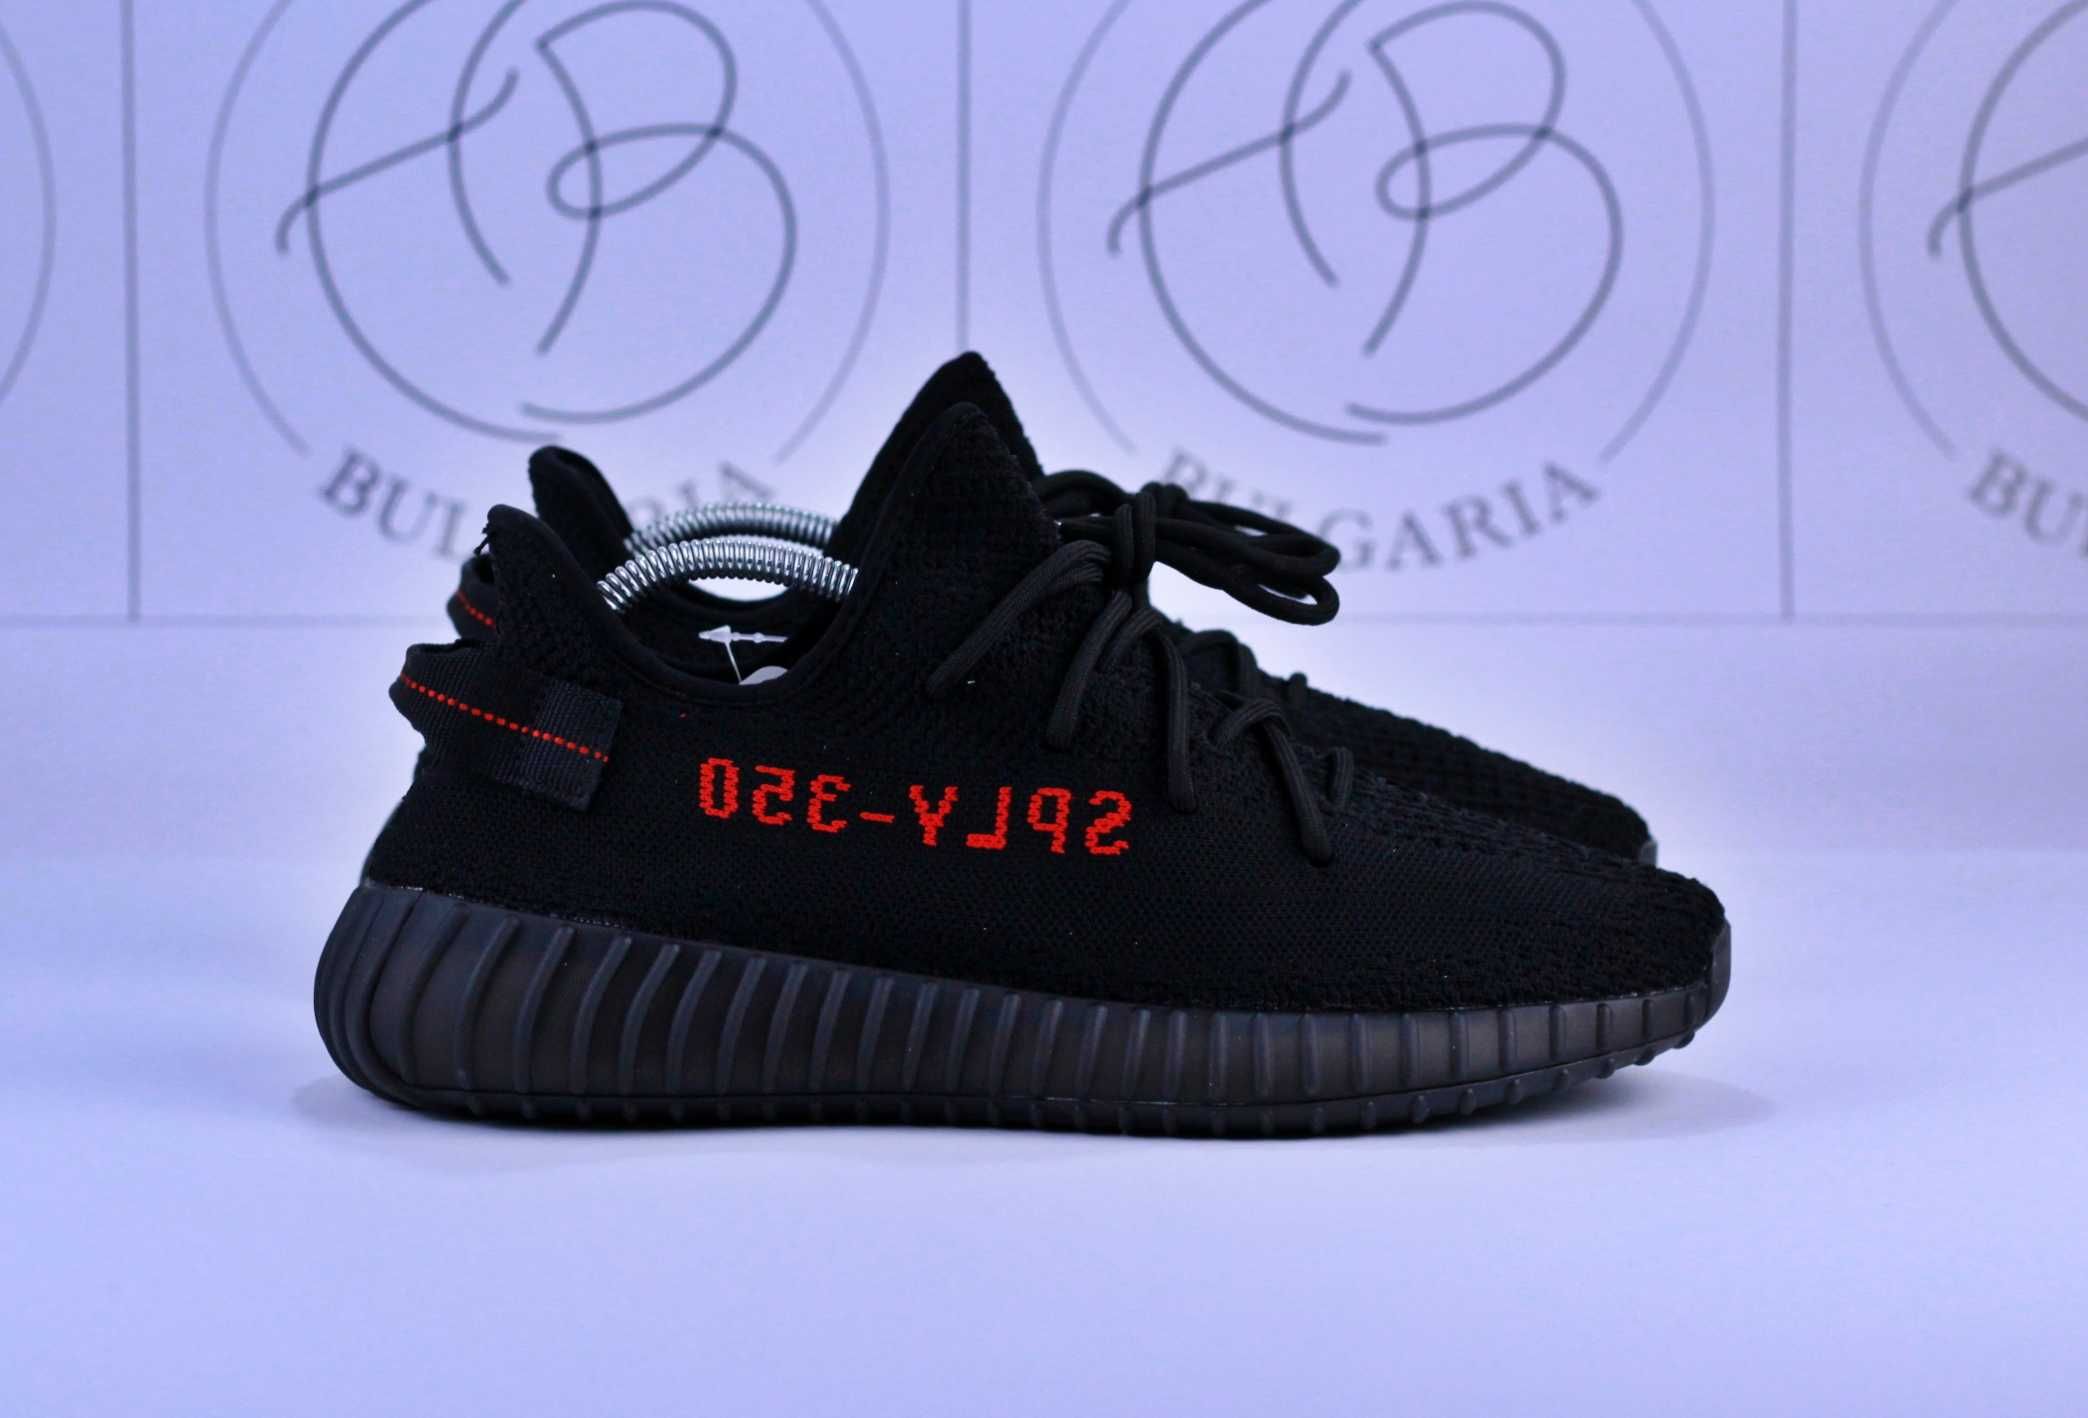 Adidas Yeezy Boost 350 - Black Reflective, Carbon, Bred, Blue Tint